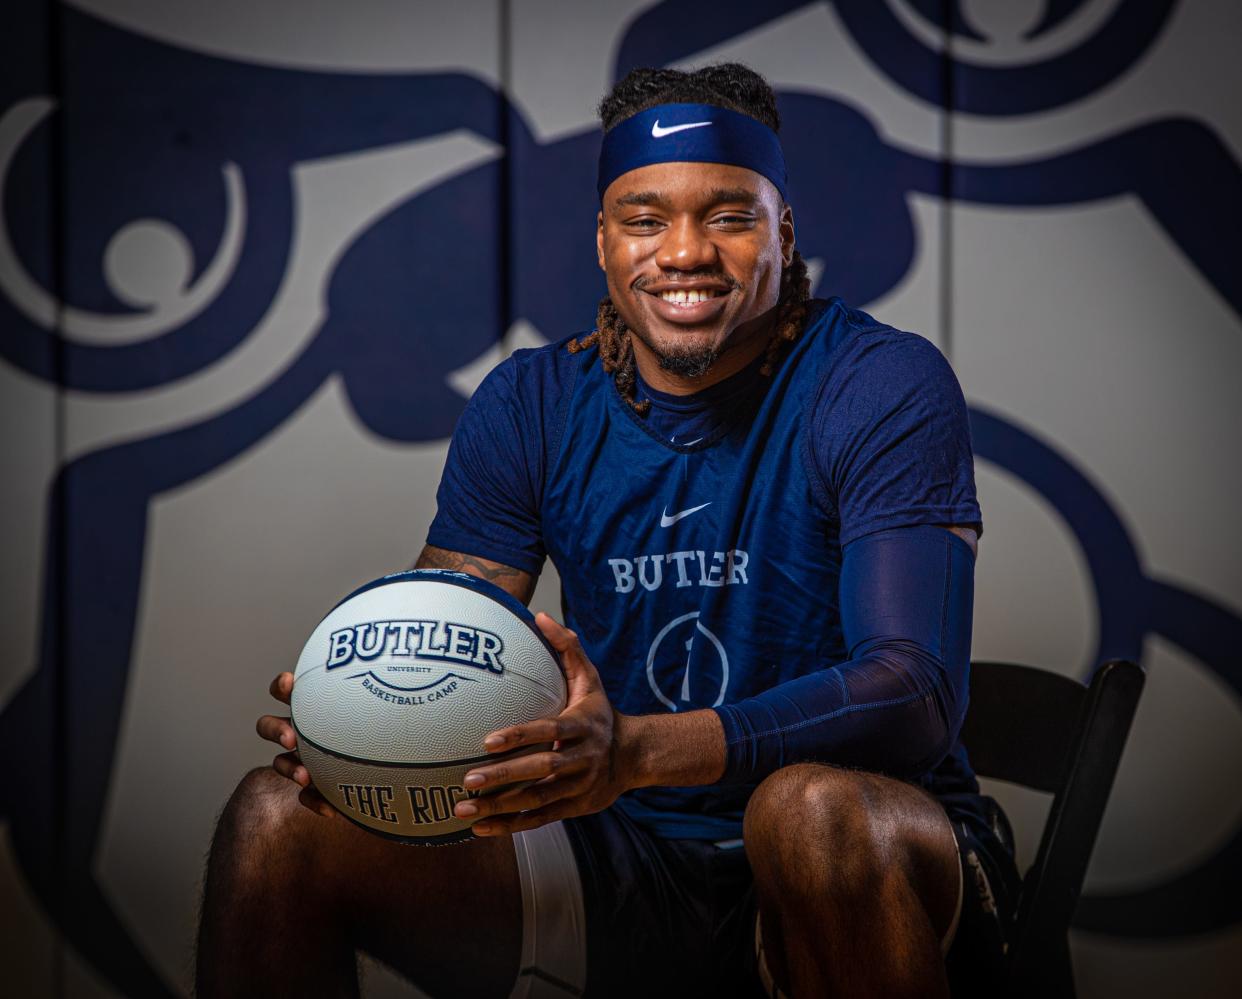 Butler University basketball player Jahmyl Telfort Media Day on Wednesday, Oct. 17, 2023, in the Butler University practice gym in Indianapolis.